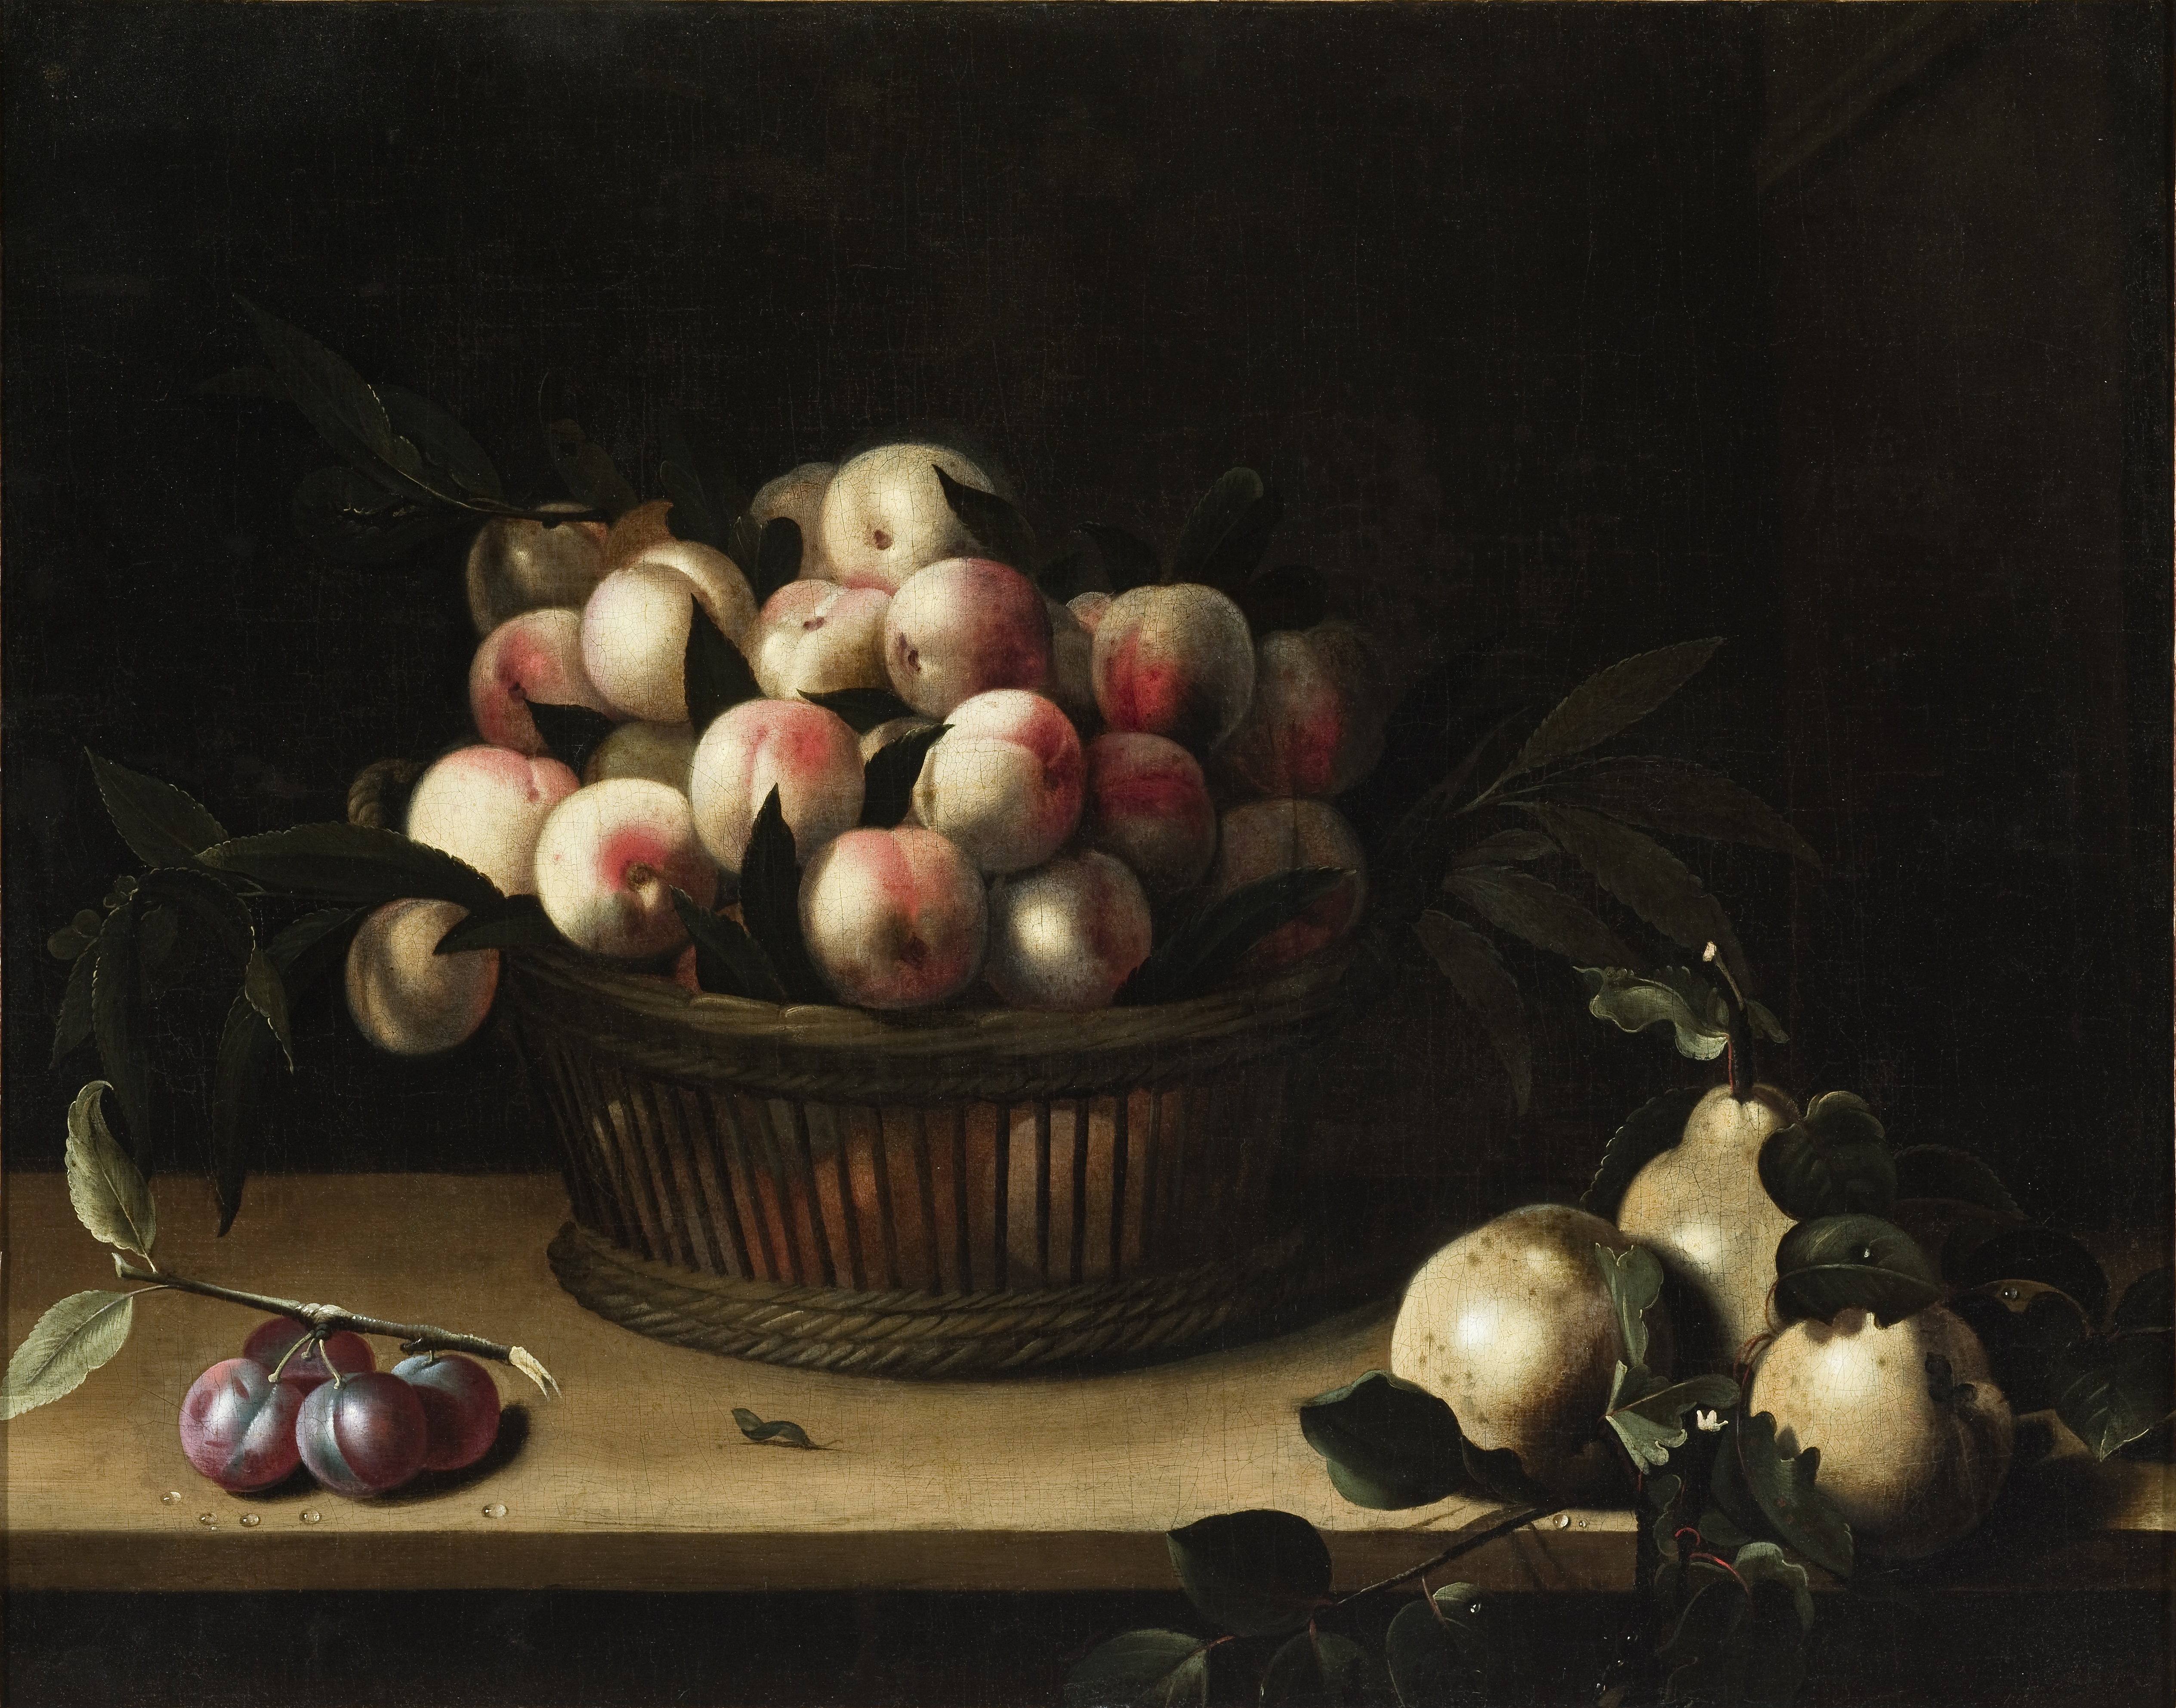 A woven basket filled with quinces rests on a table in this still life painting. There are plums and pears arranged on the simple wood table alongside the basket. The background is black and it is hard to distinguish the dark green leaves surrounding the quinces and the pears from the background.